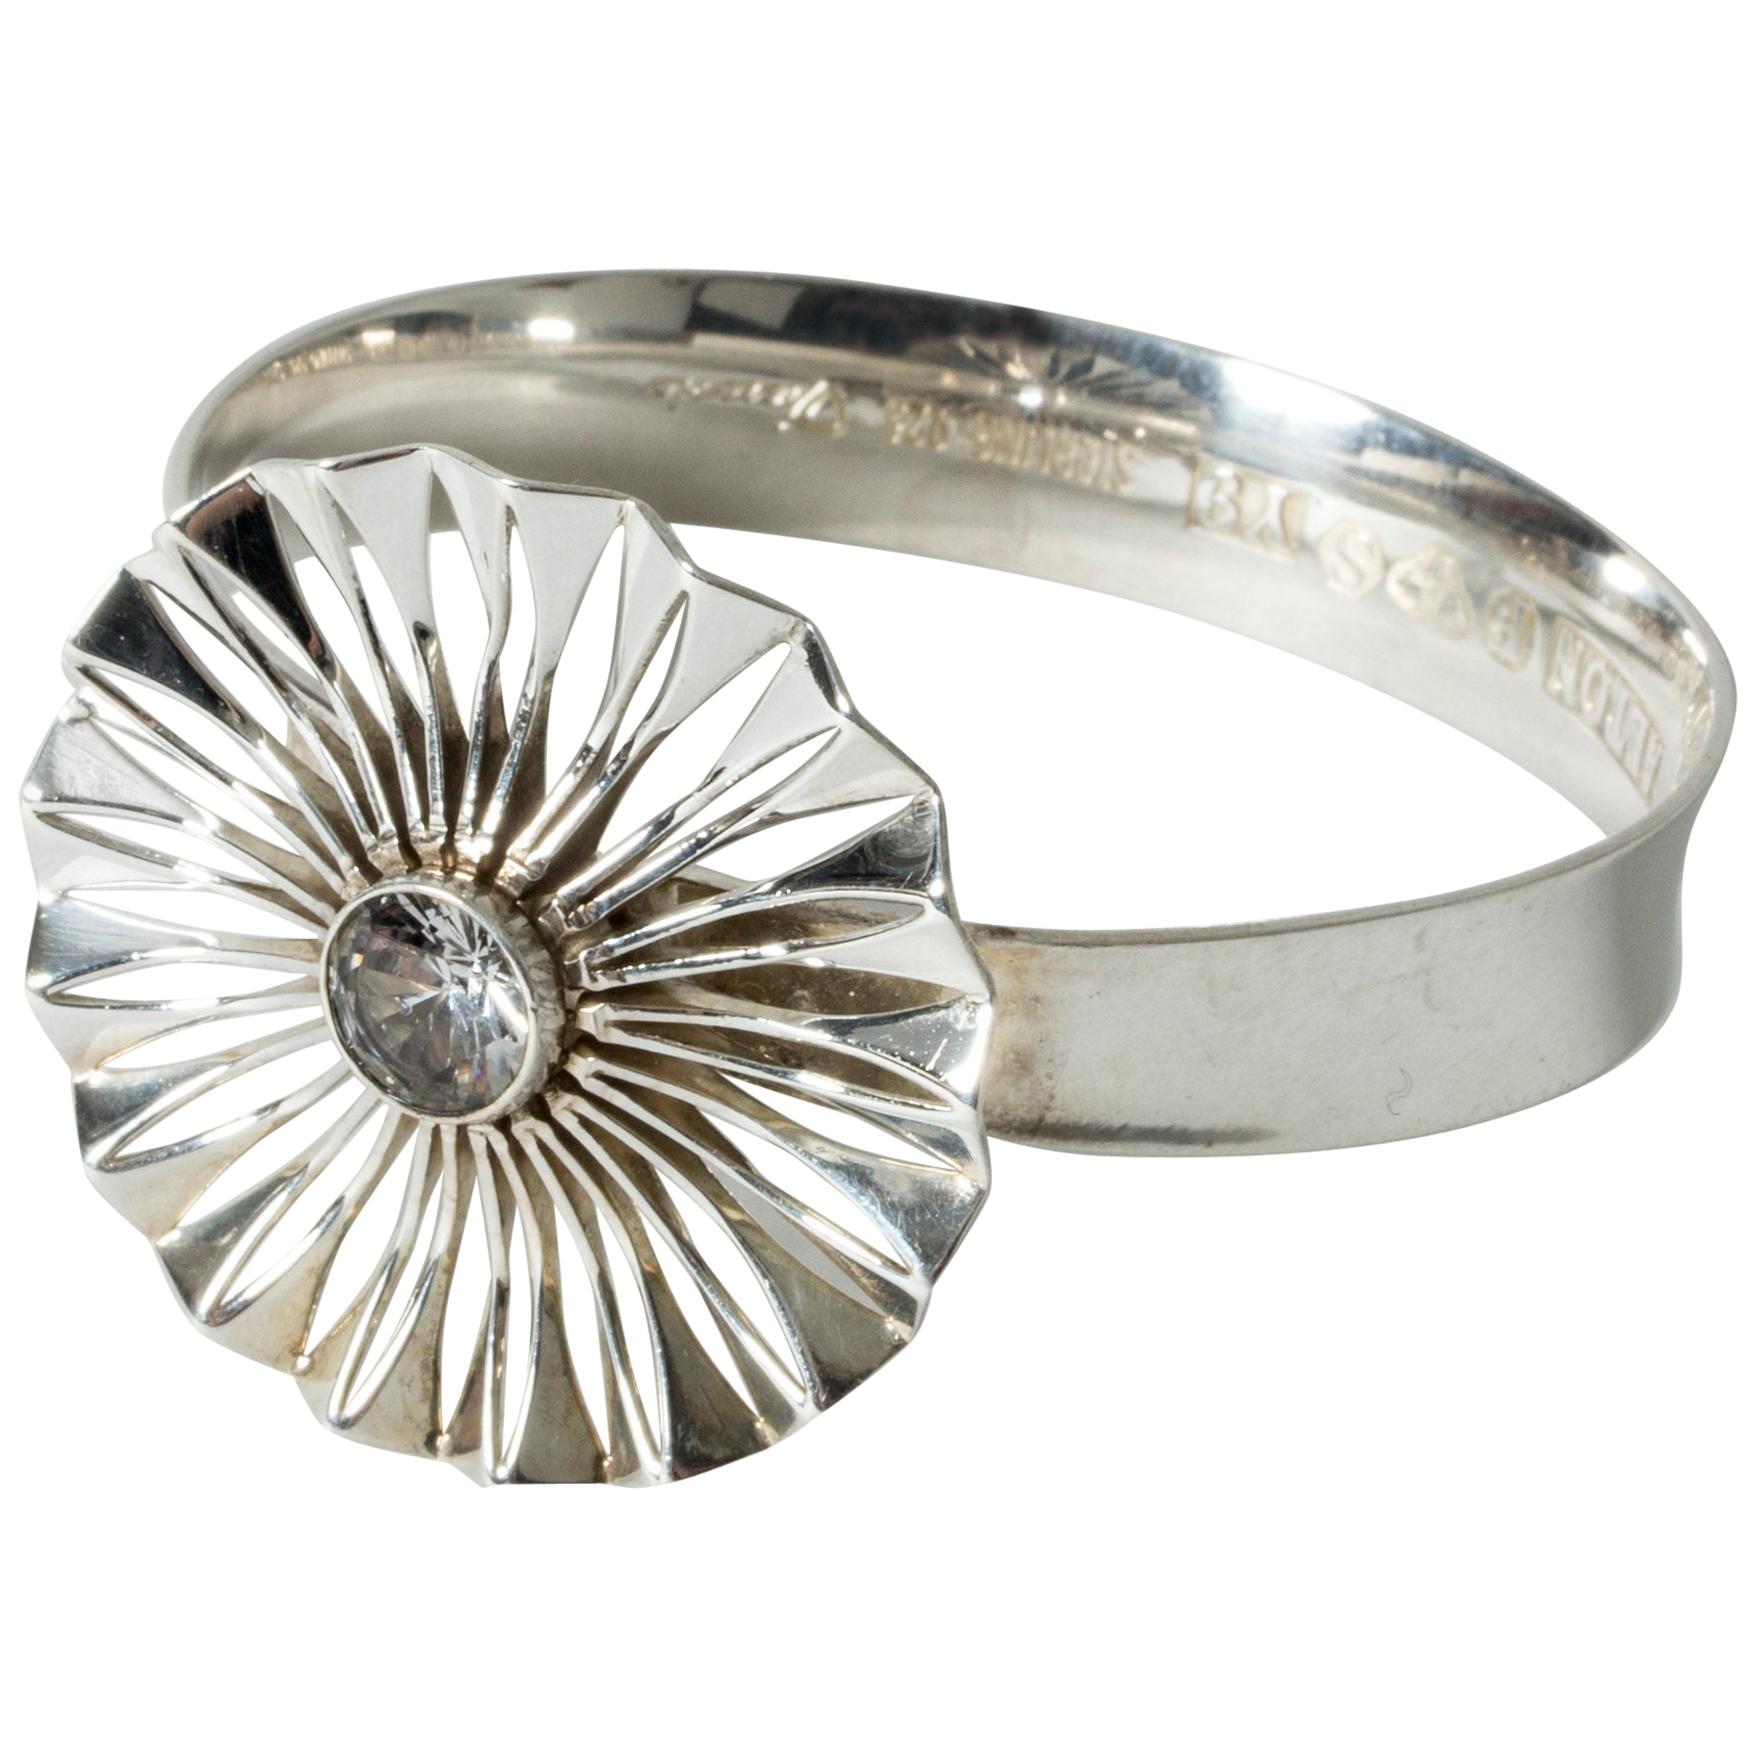 Modernist Gold and Rock Crystal Ring from Alton, Sweden, 1976 at 1stDibs